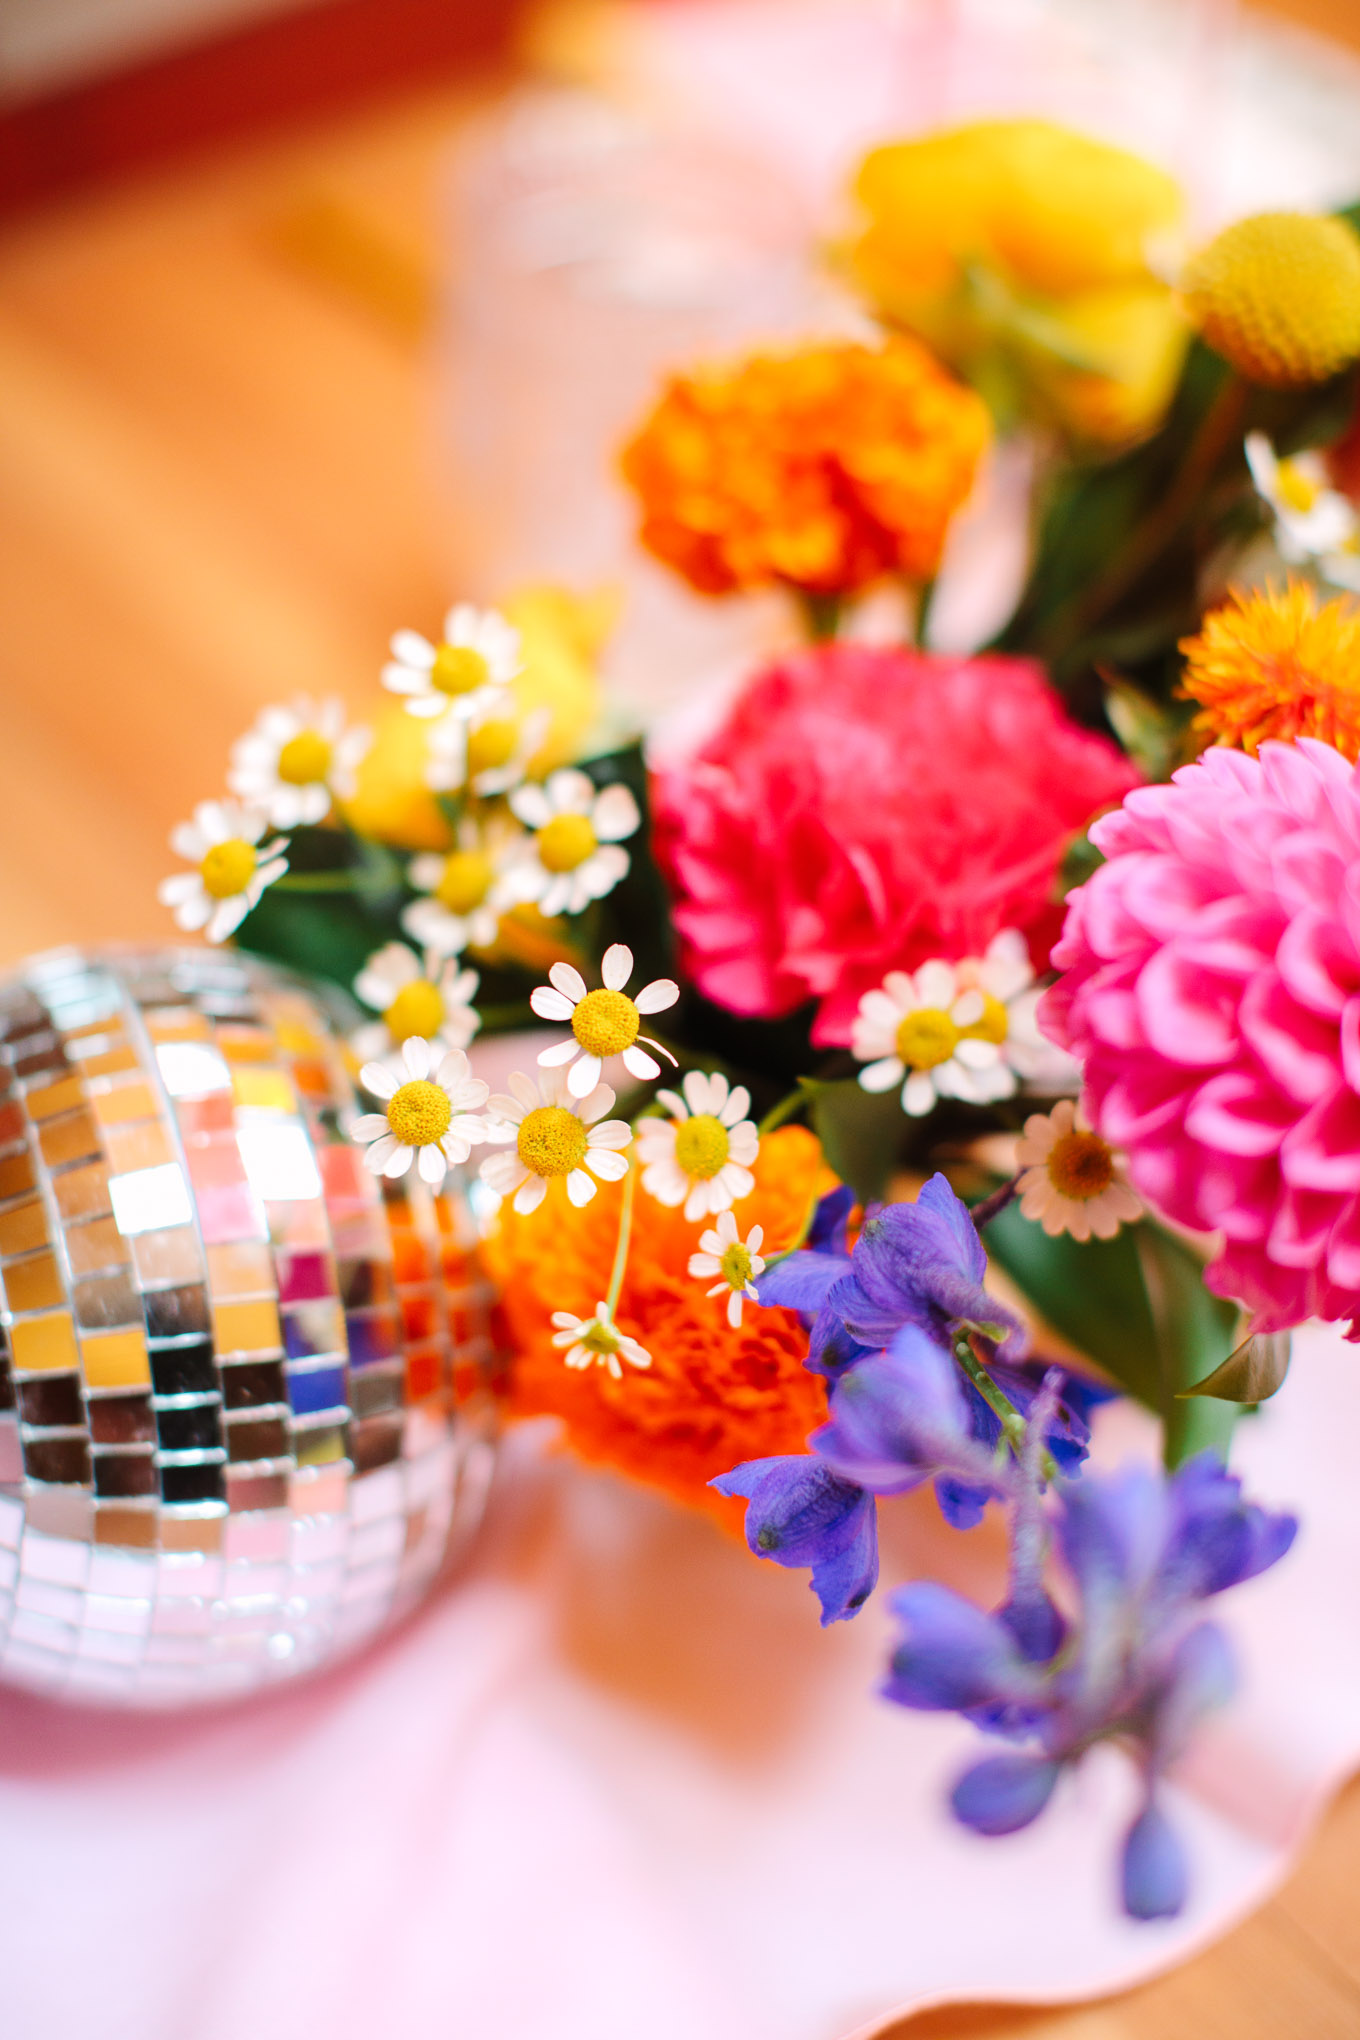 Disco ball and florals at wedding reception | Colorful Downtown Los Angeles Valentine Wedding | Los Angeles wedding photographer | #losangeleswedding #colorfulwedding #DTLA #valentinedtla   Source: Mary Costa Photography | Los Angeles